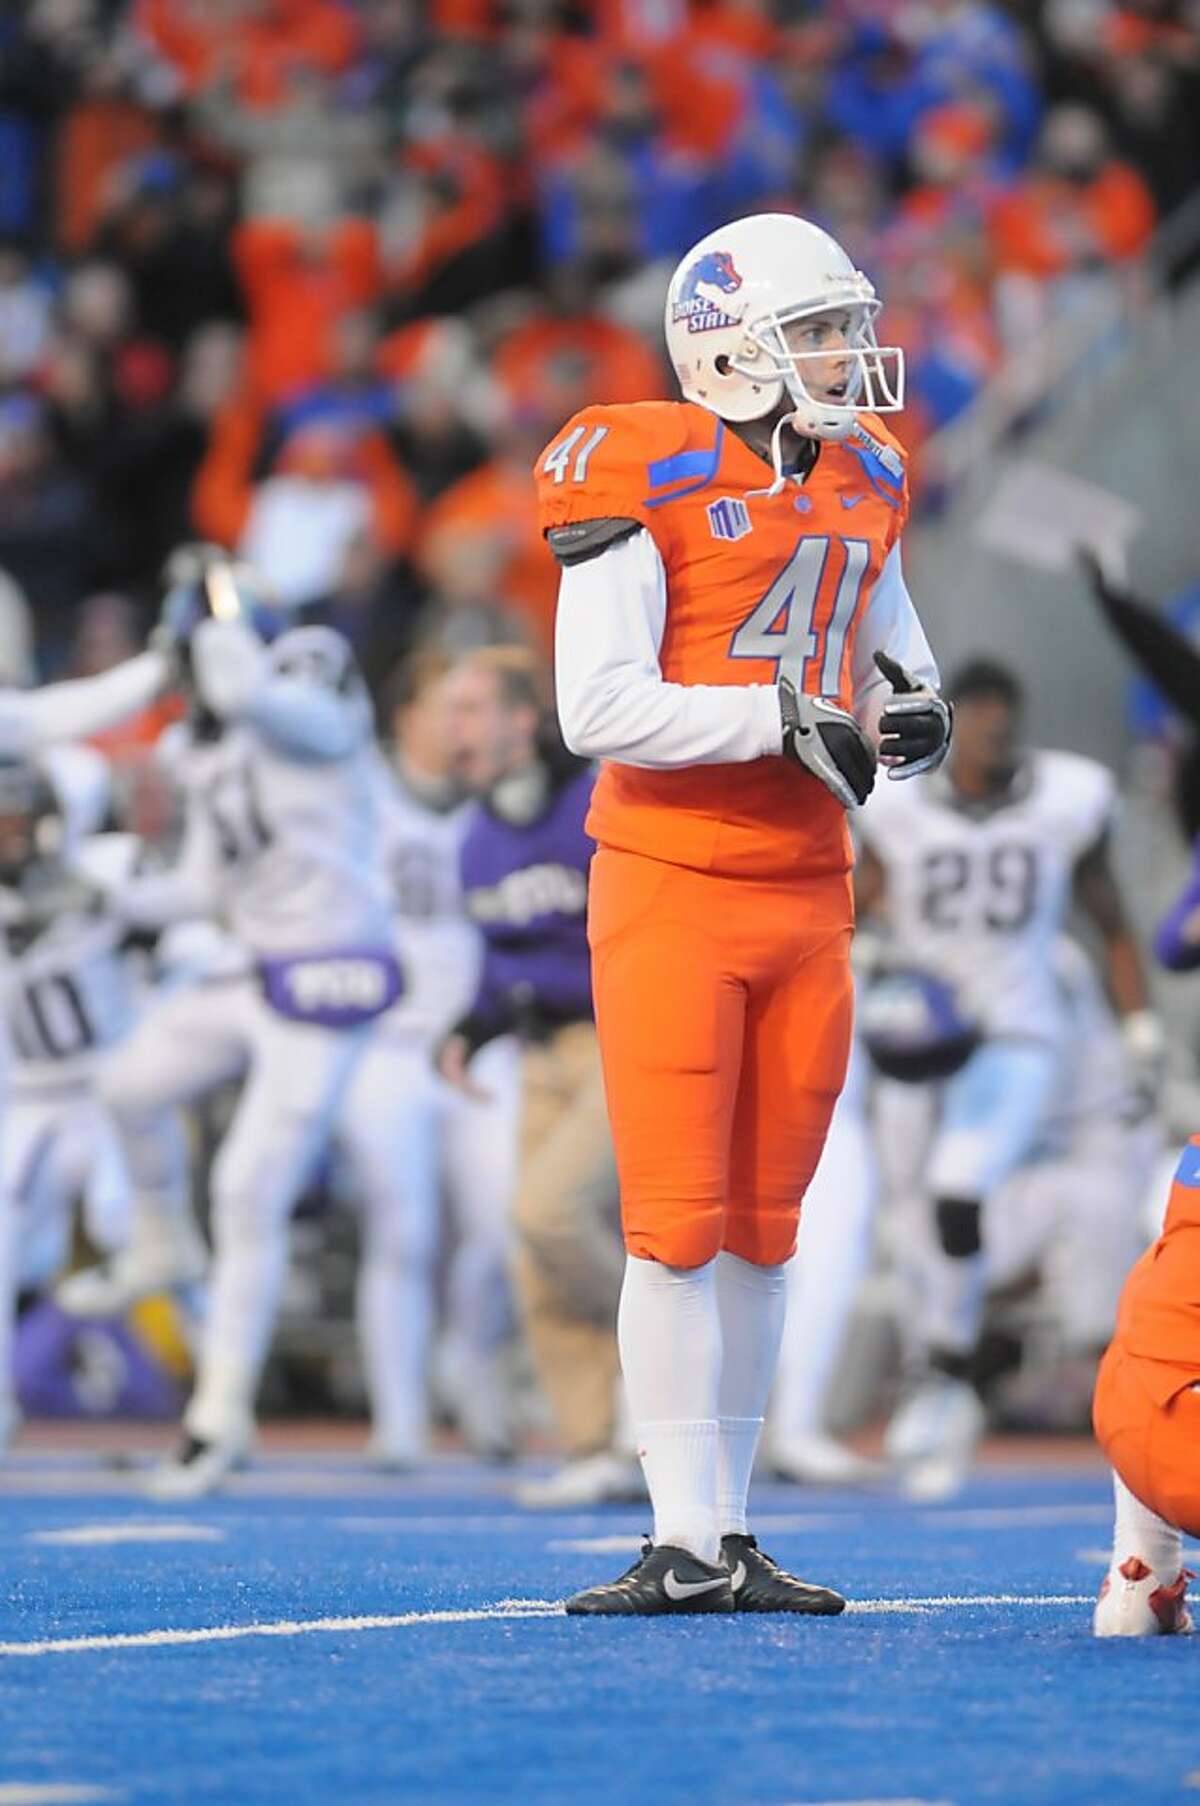 Boise State kicker Dan Goodale reacts after missing a field goal in the final seconds of an NCAA college football game against TCU on Saturday, Nov. 12, 2011 in Boise, Idaho. Boise State lost 36-35. (AP Photo/Idaho Press-Tribune, Charlie Litchfield) MANDATORY CREDIT